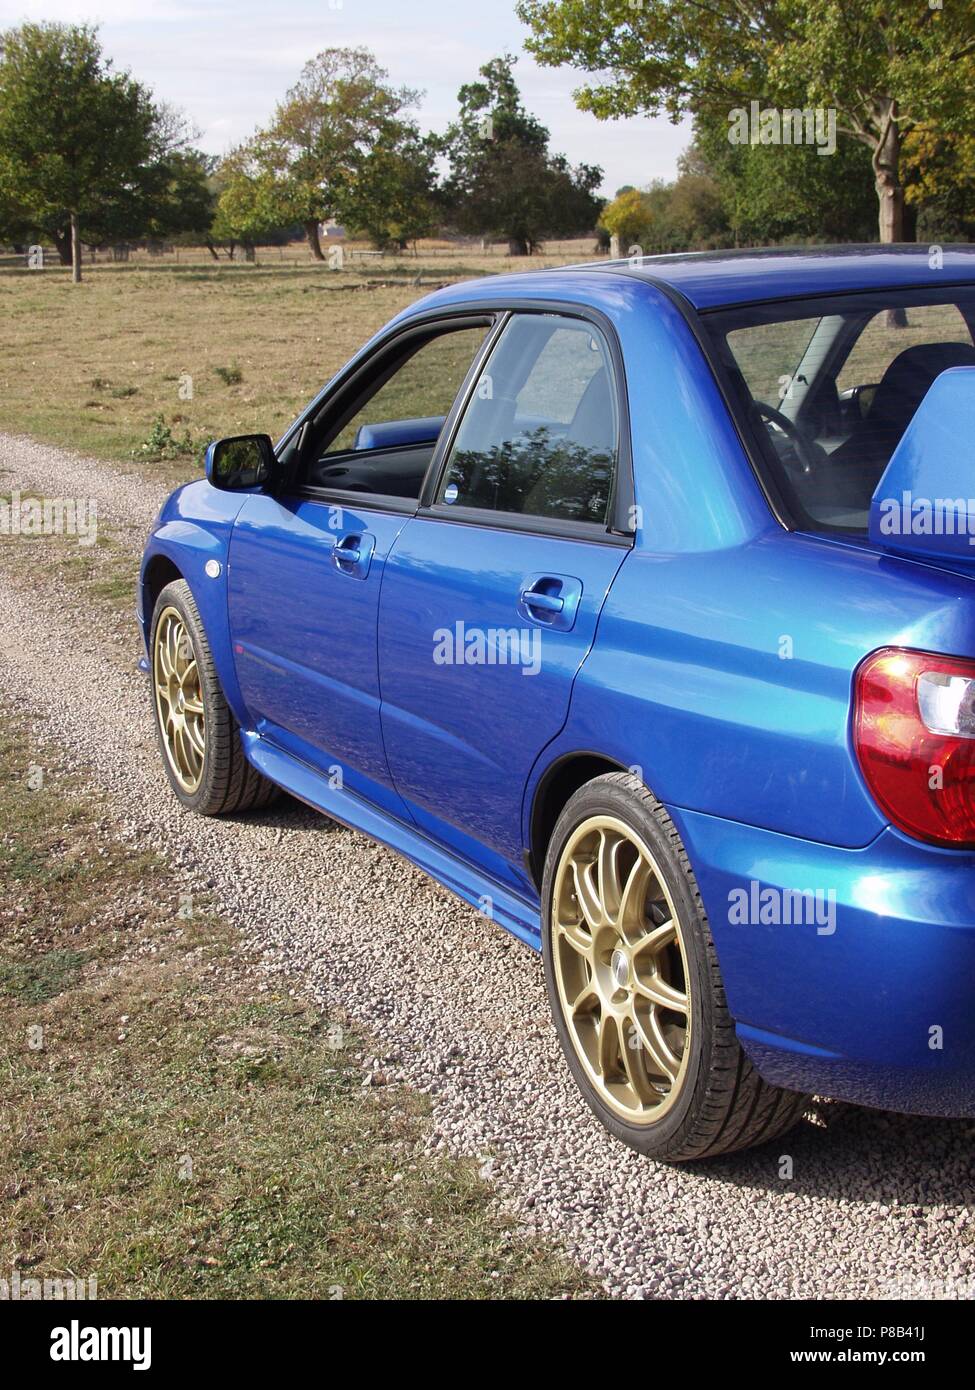 Subaru Impreza WRX STI in WR blue pearl colour with alloy wheels - showing rear and side view Stock Photo